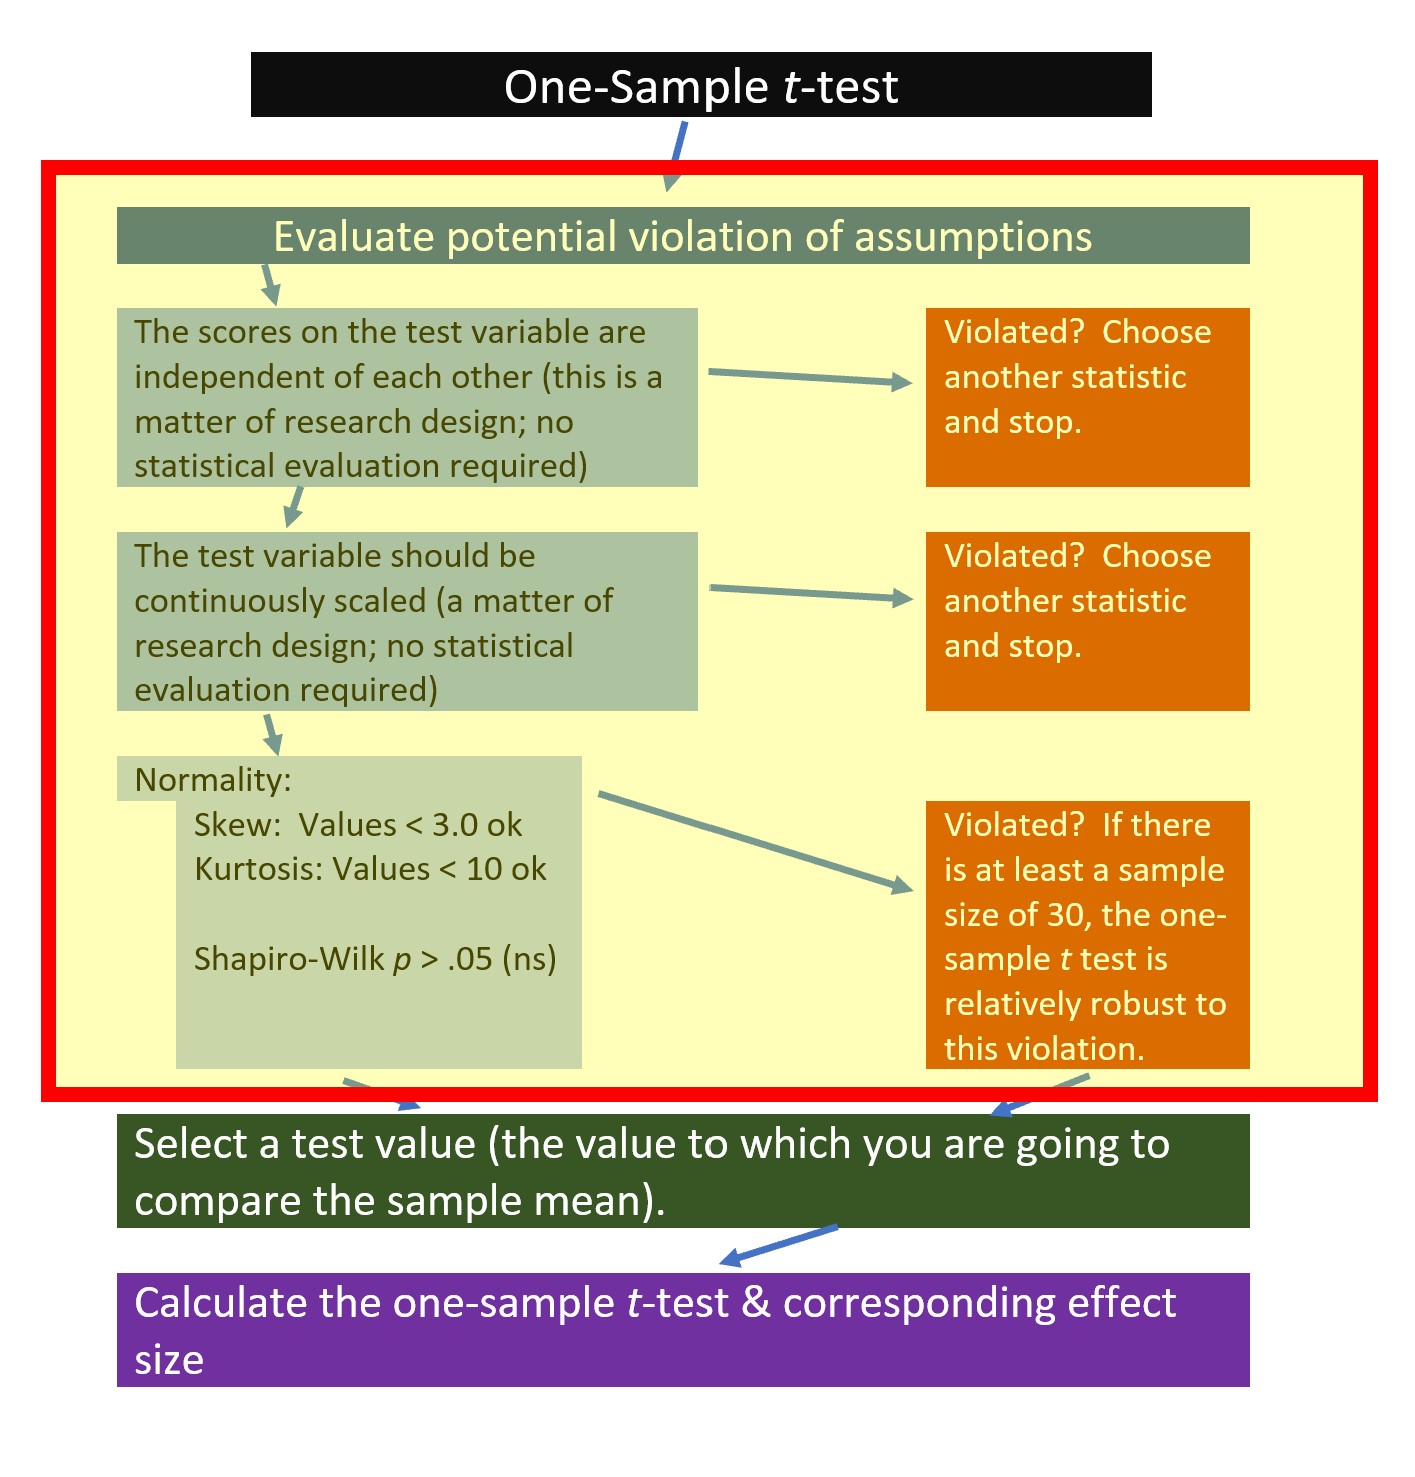 The workflow for the one sample t-test highlighting the evaluation of assumptions section